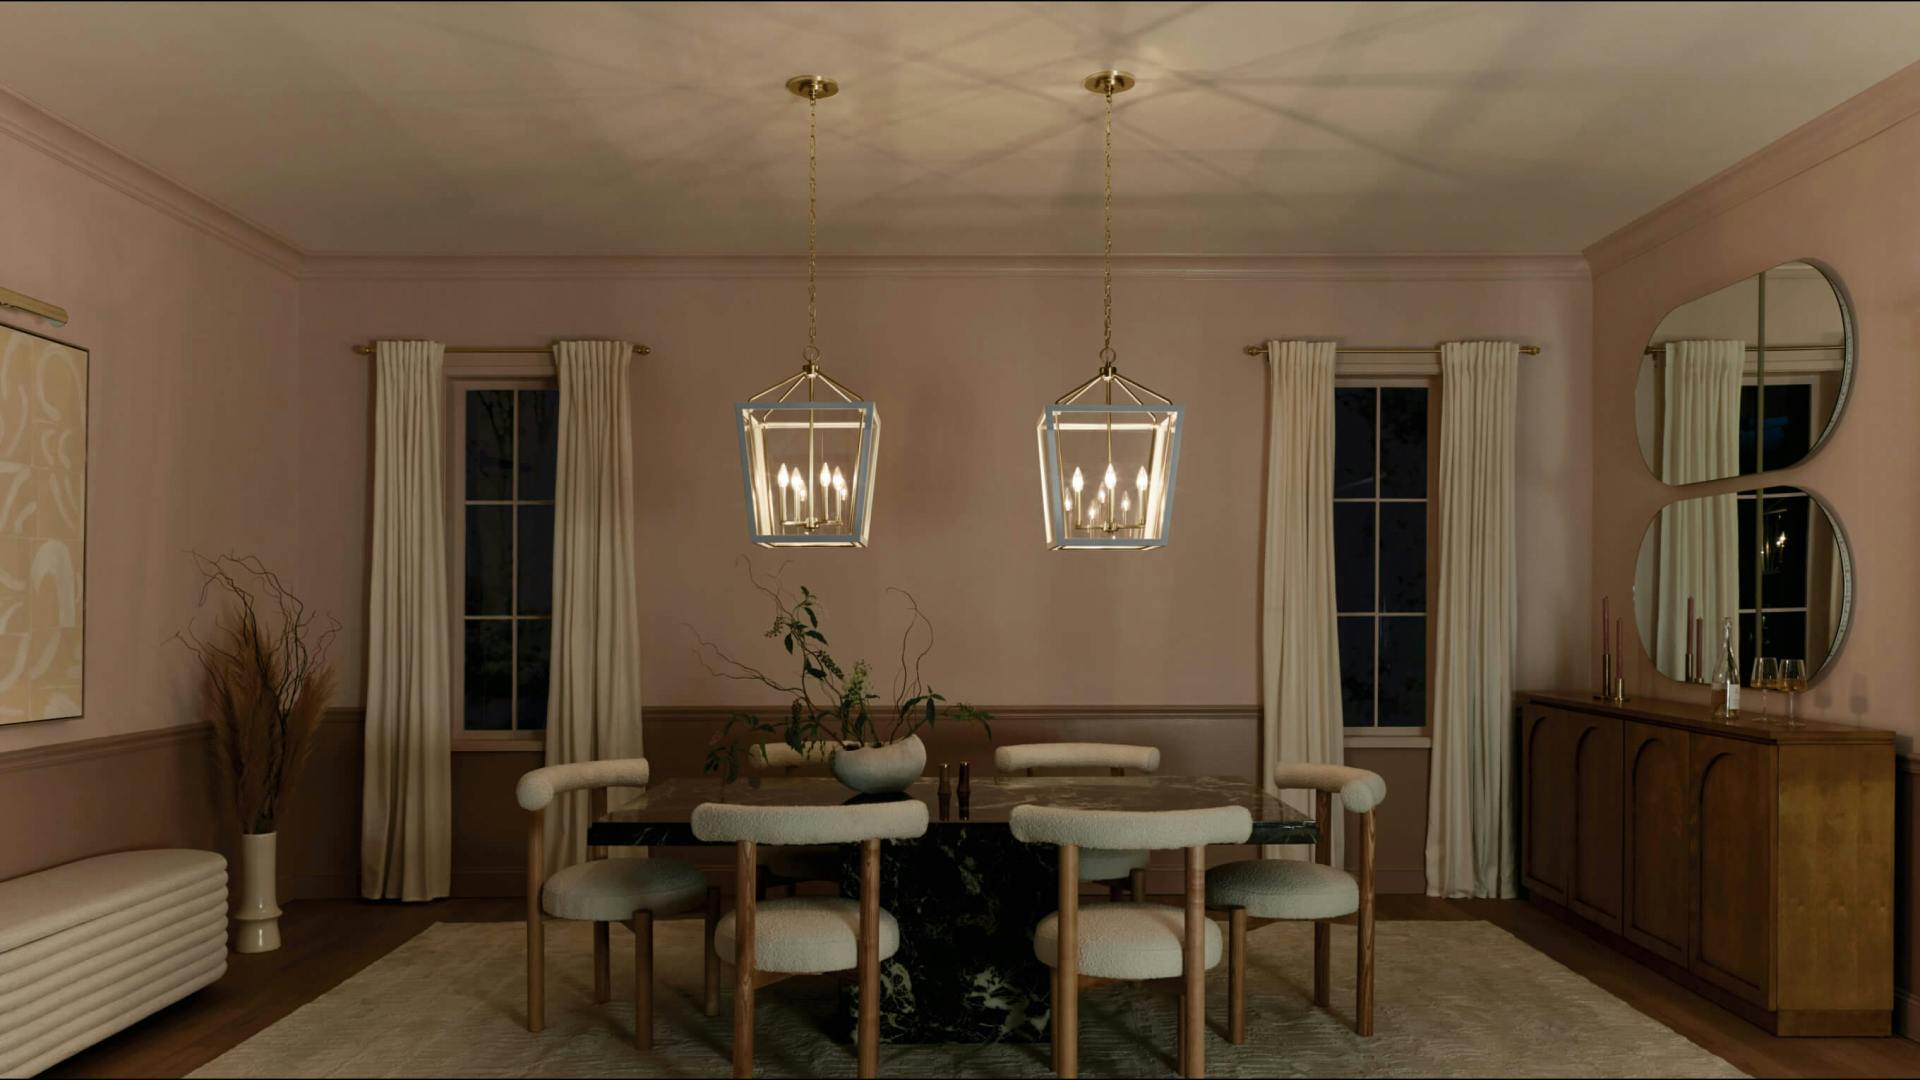 Dinning room with Delvin pendant lights turned on over a dinning room table 